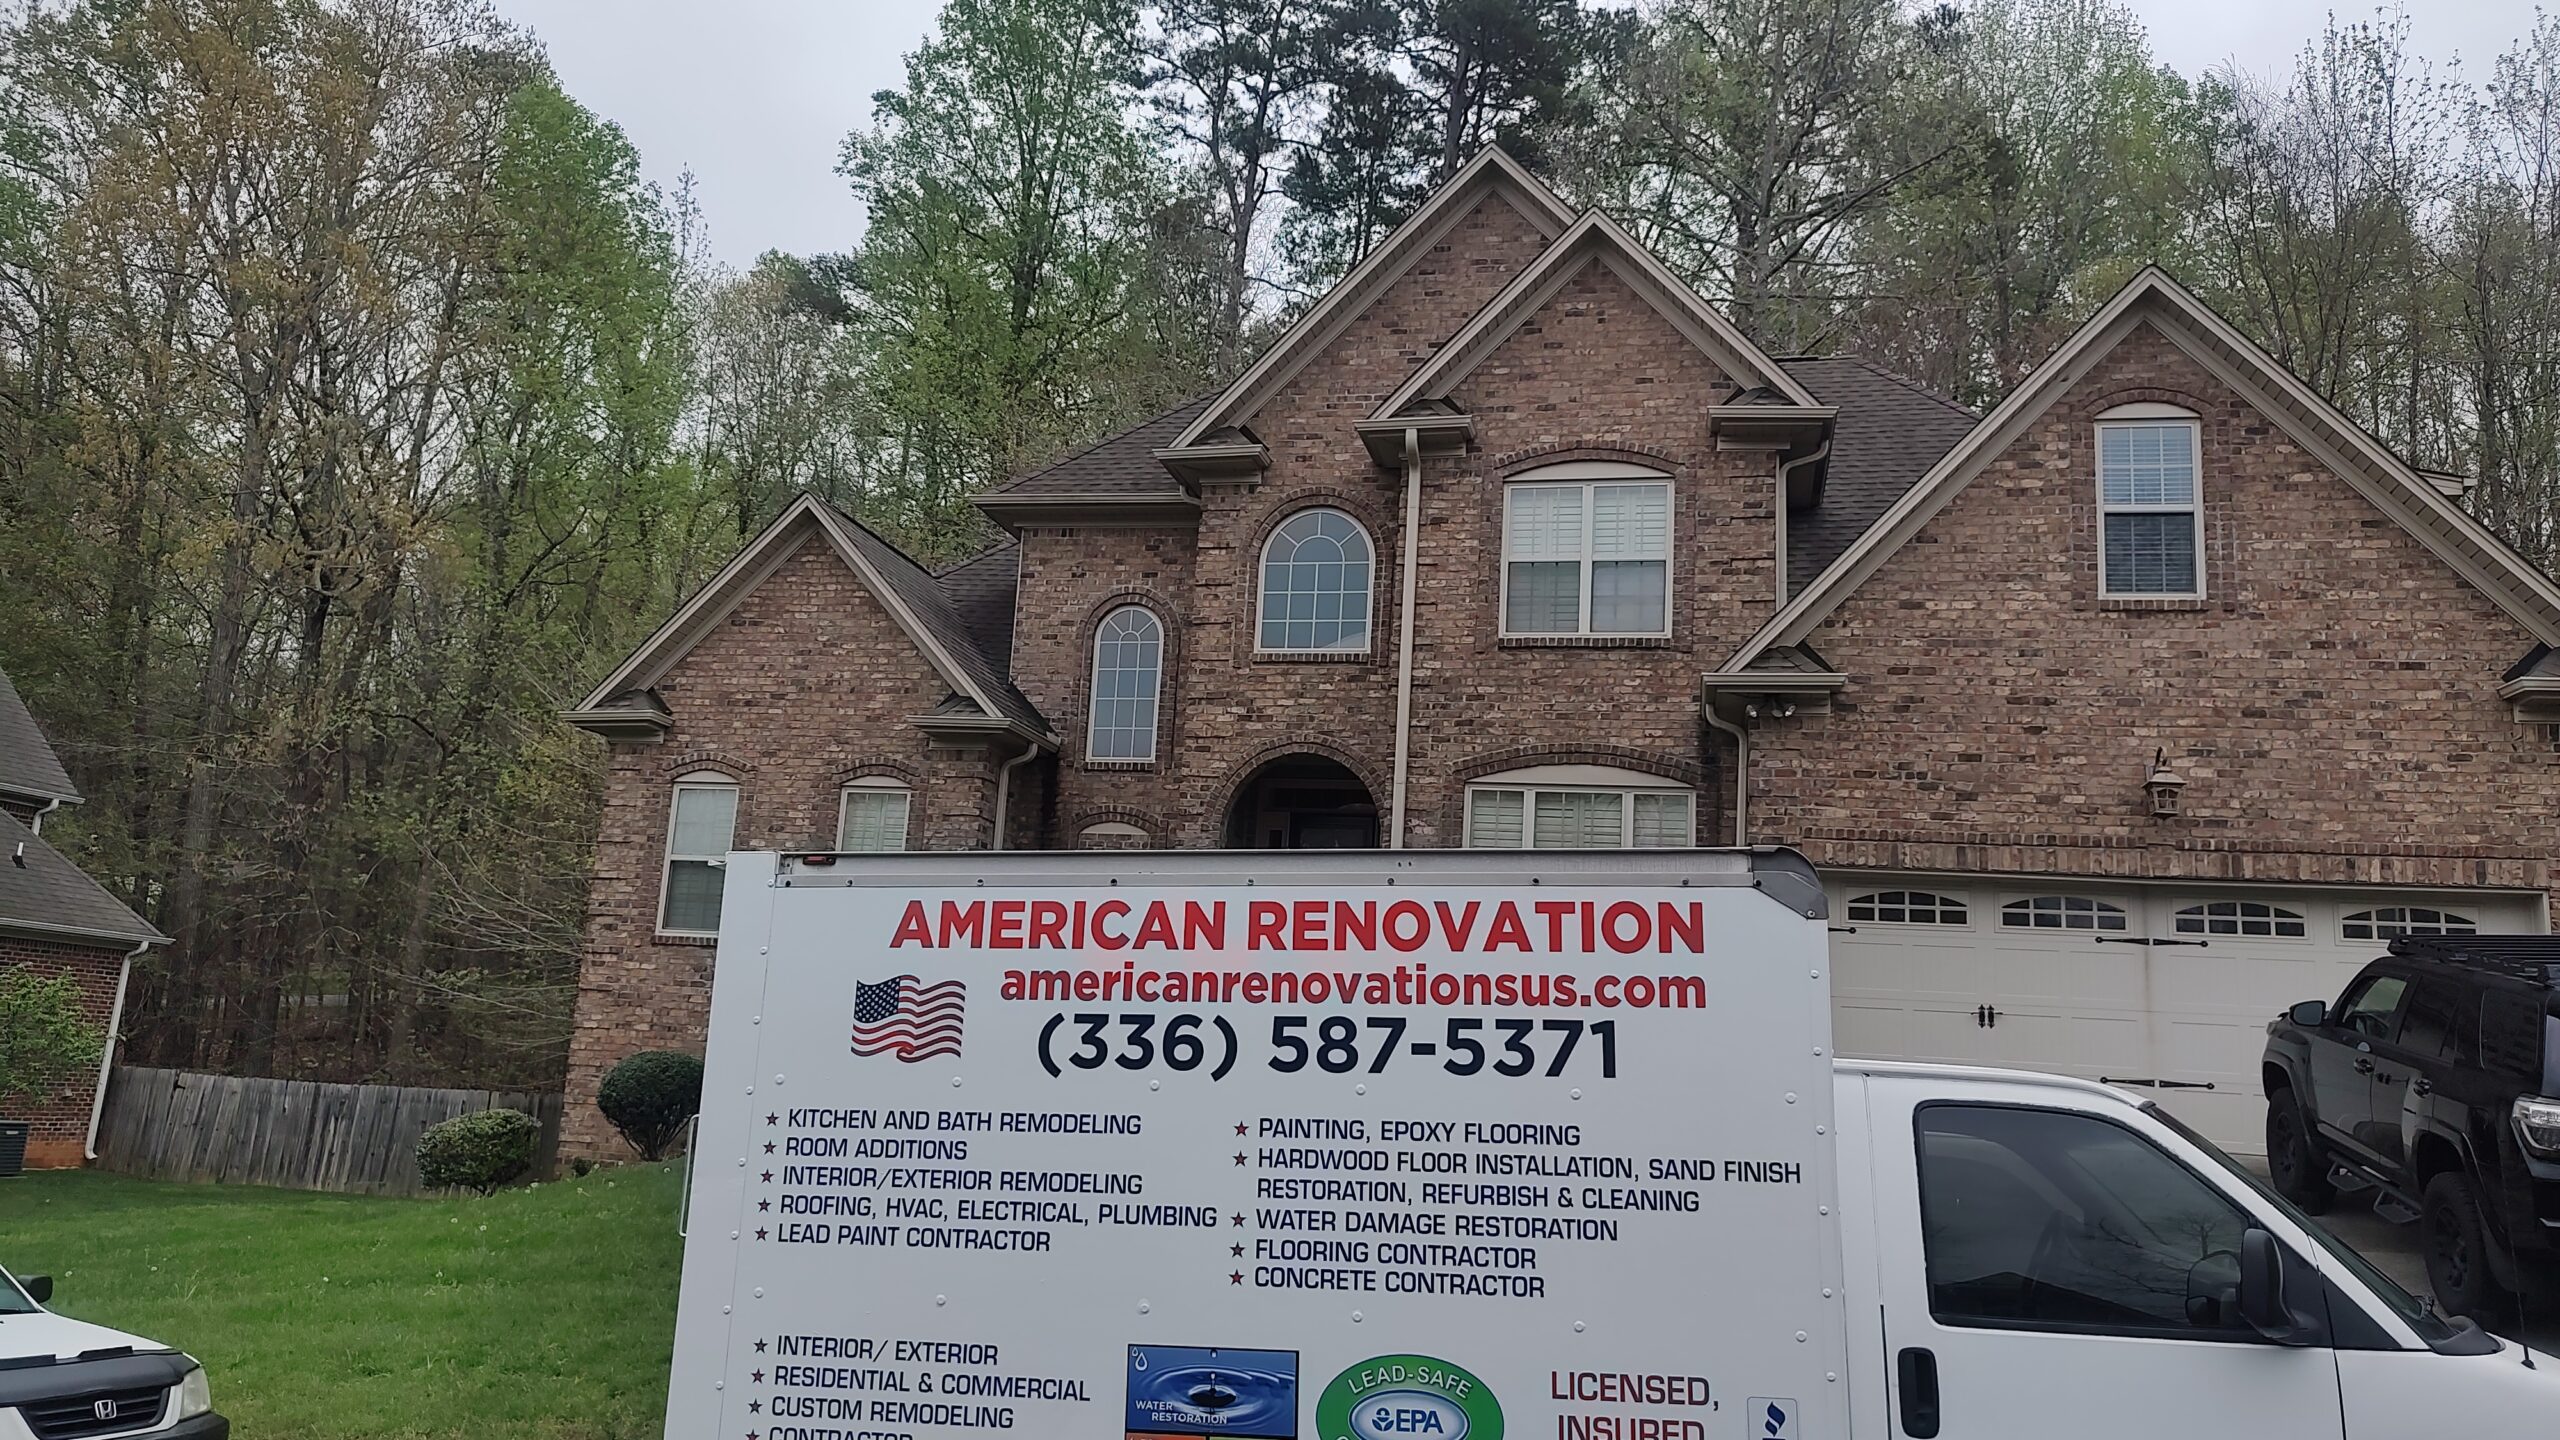 American Renovation Interior Exterior Residential Commercial Remodeling Contractor